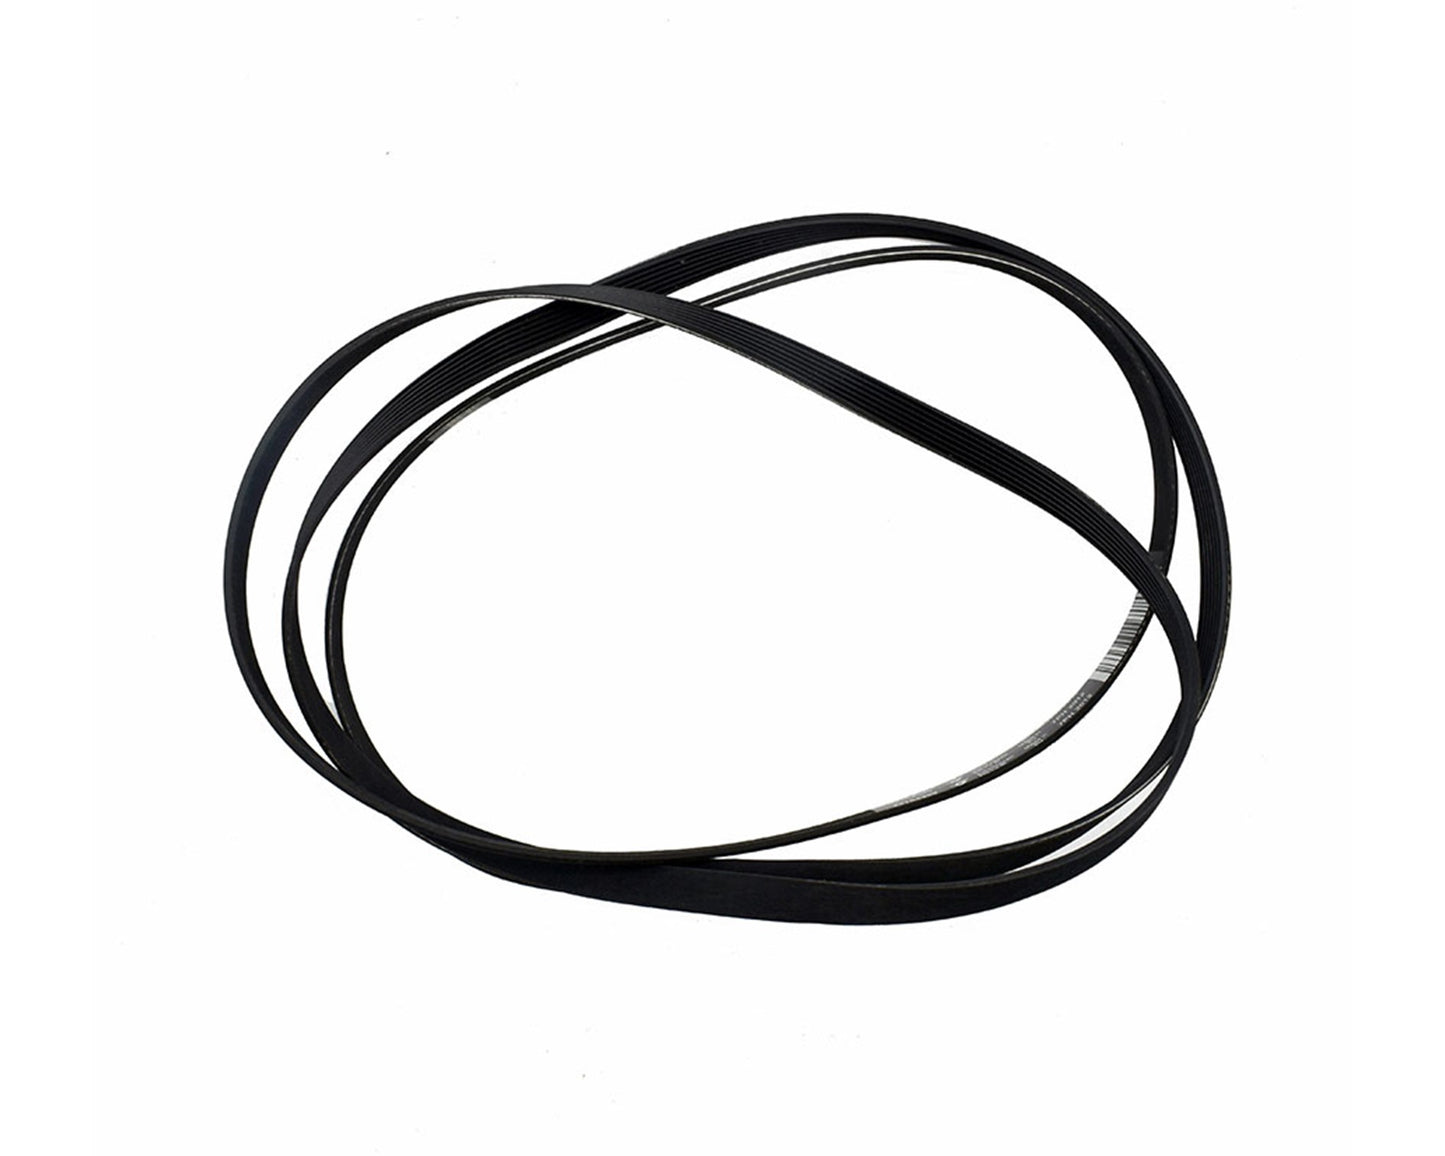 Genuine Hutchinson Tumble Dryer Belt Replacement for Lamona FLM8800 - A42164399